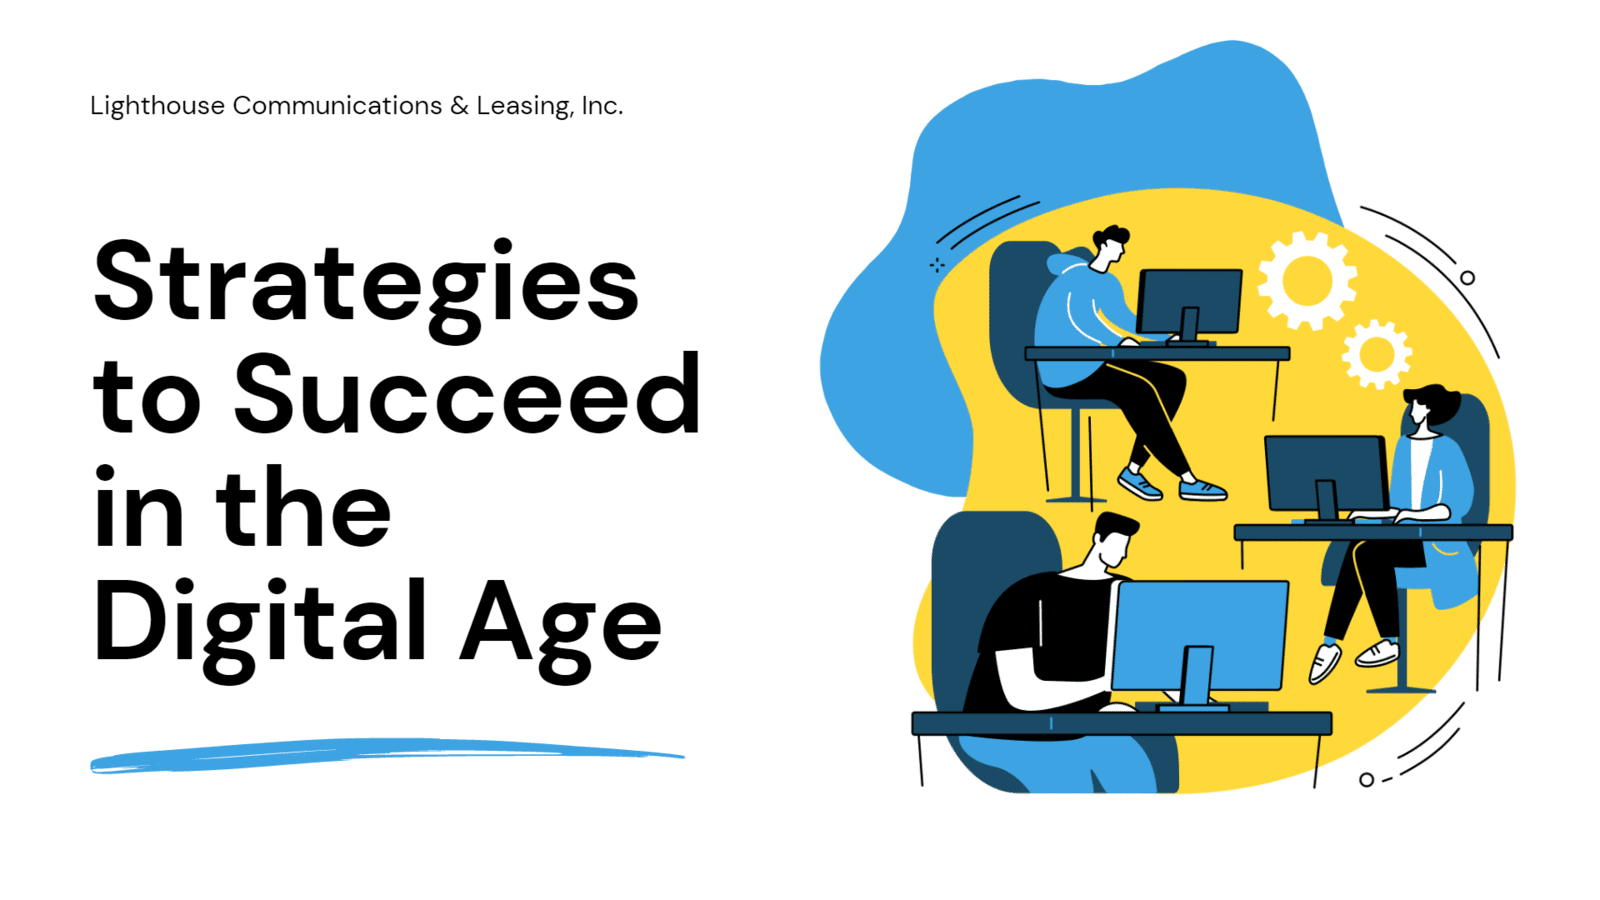 Strategies to Succeed in the Digital Age